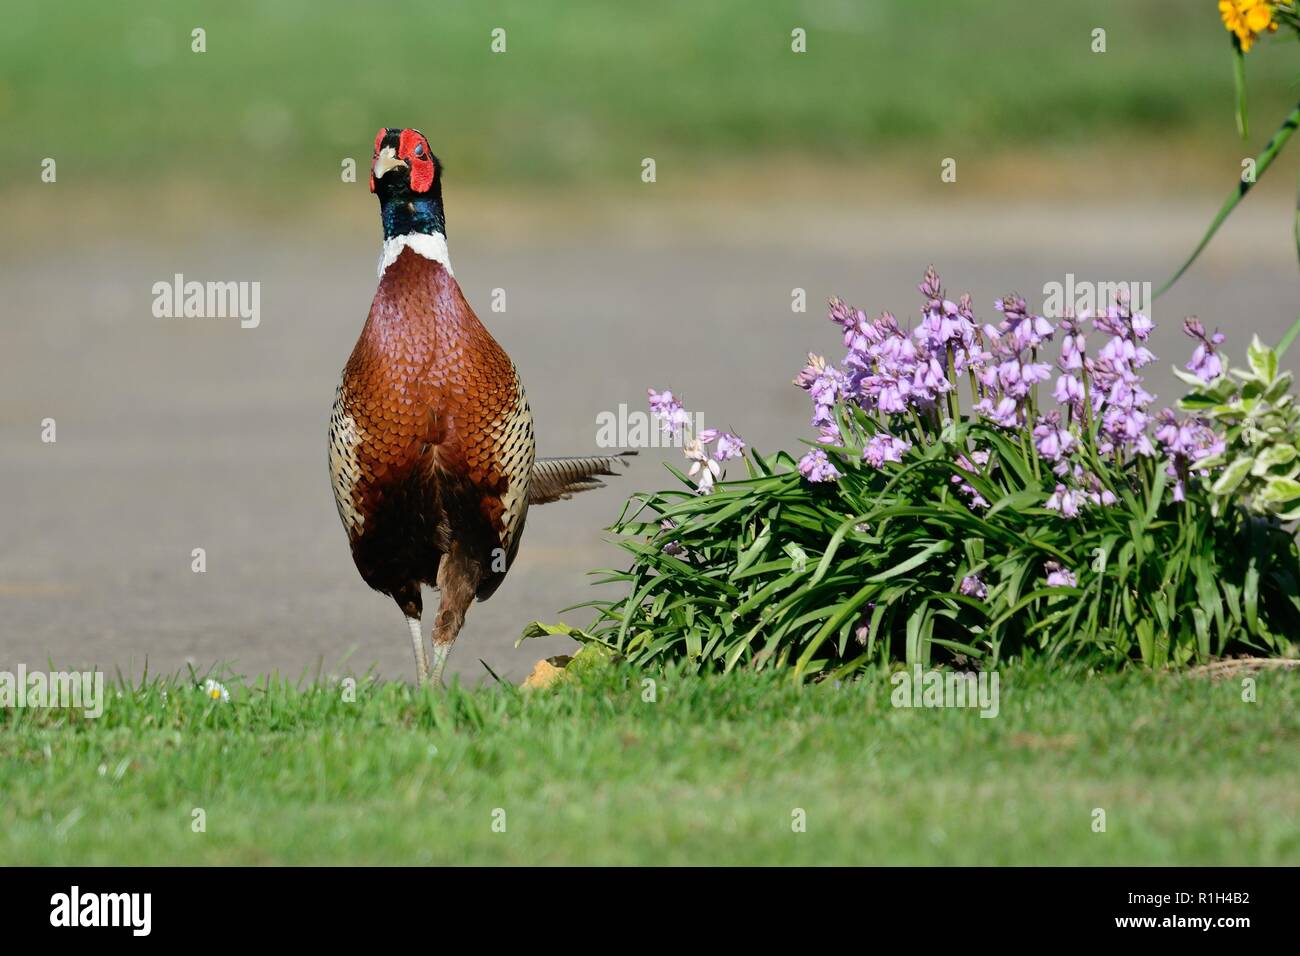 Porttrait of a common pheasant (phasianus colchicus) walking past a flowerbed in the garden Stock Photo